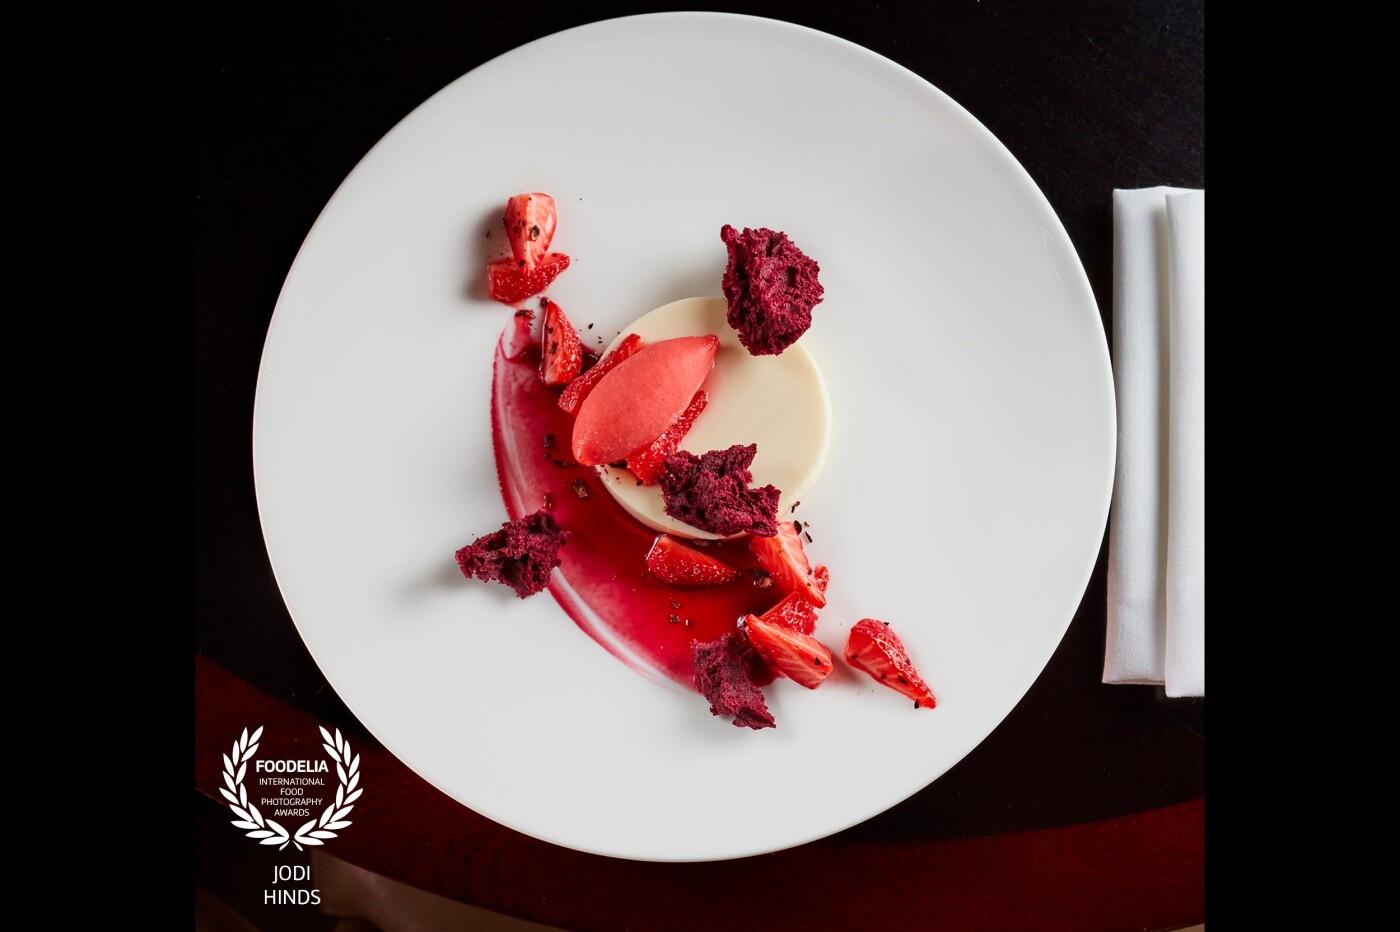 Stunning pannacotta dish for the new restaurant menu at Home House, London by the talented Chef Sophie Michell<br />
<br />
Chef: @sophiemichell<br />
Venue: @homehouse<br />
Photography: @jodihindsphoto<br />
